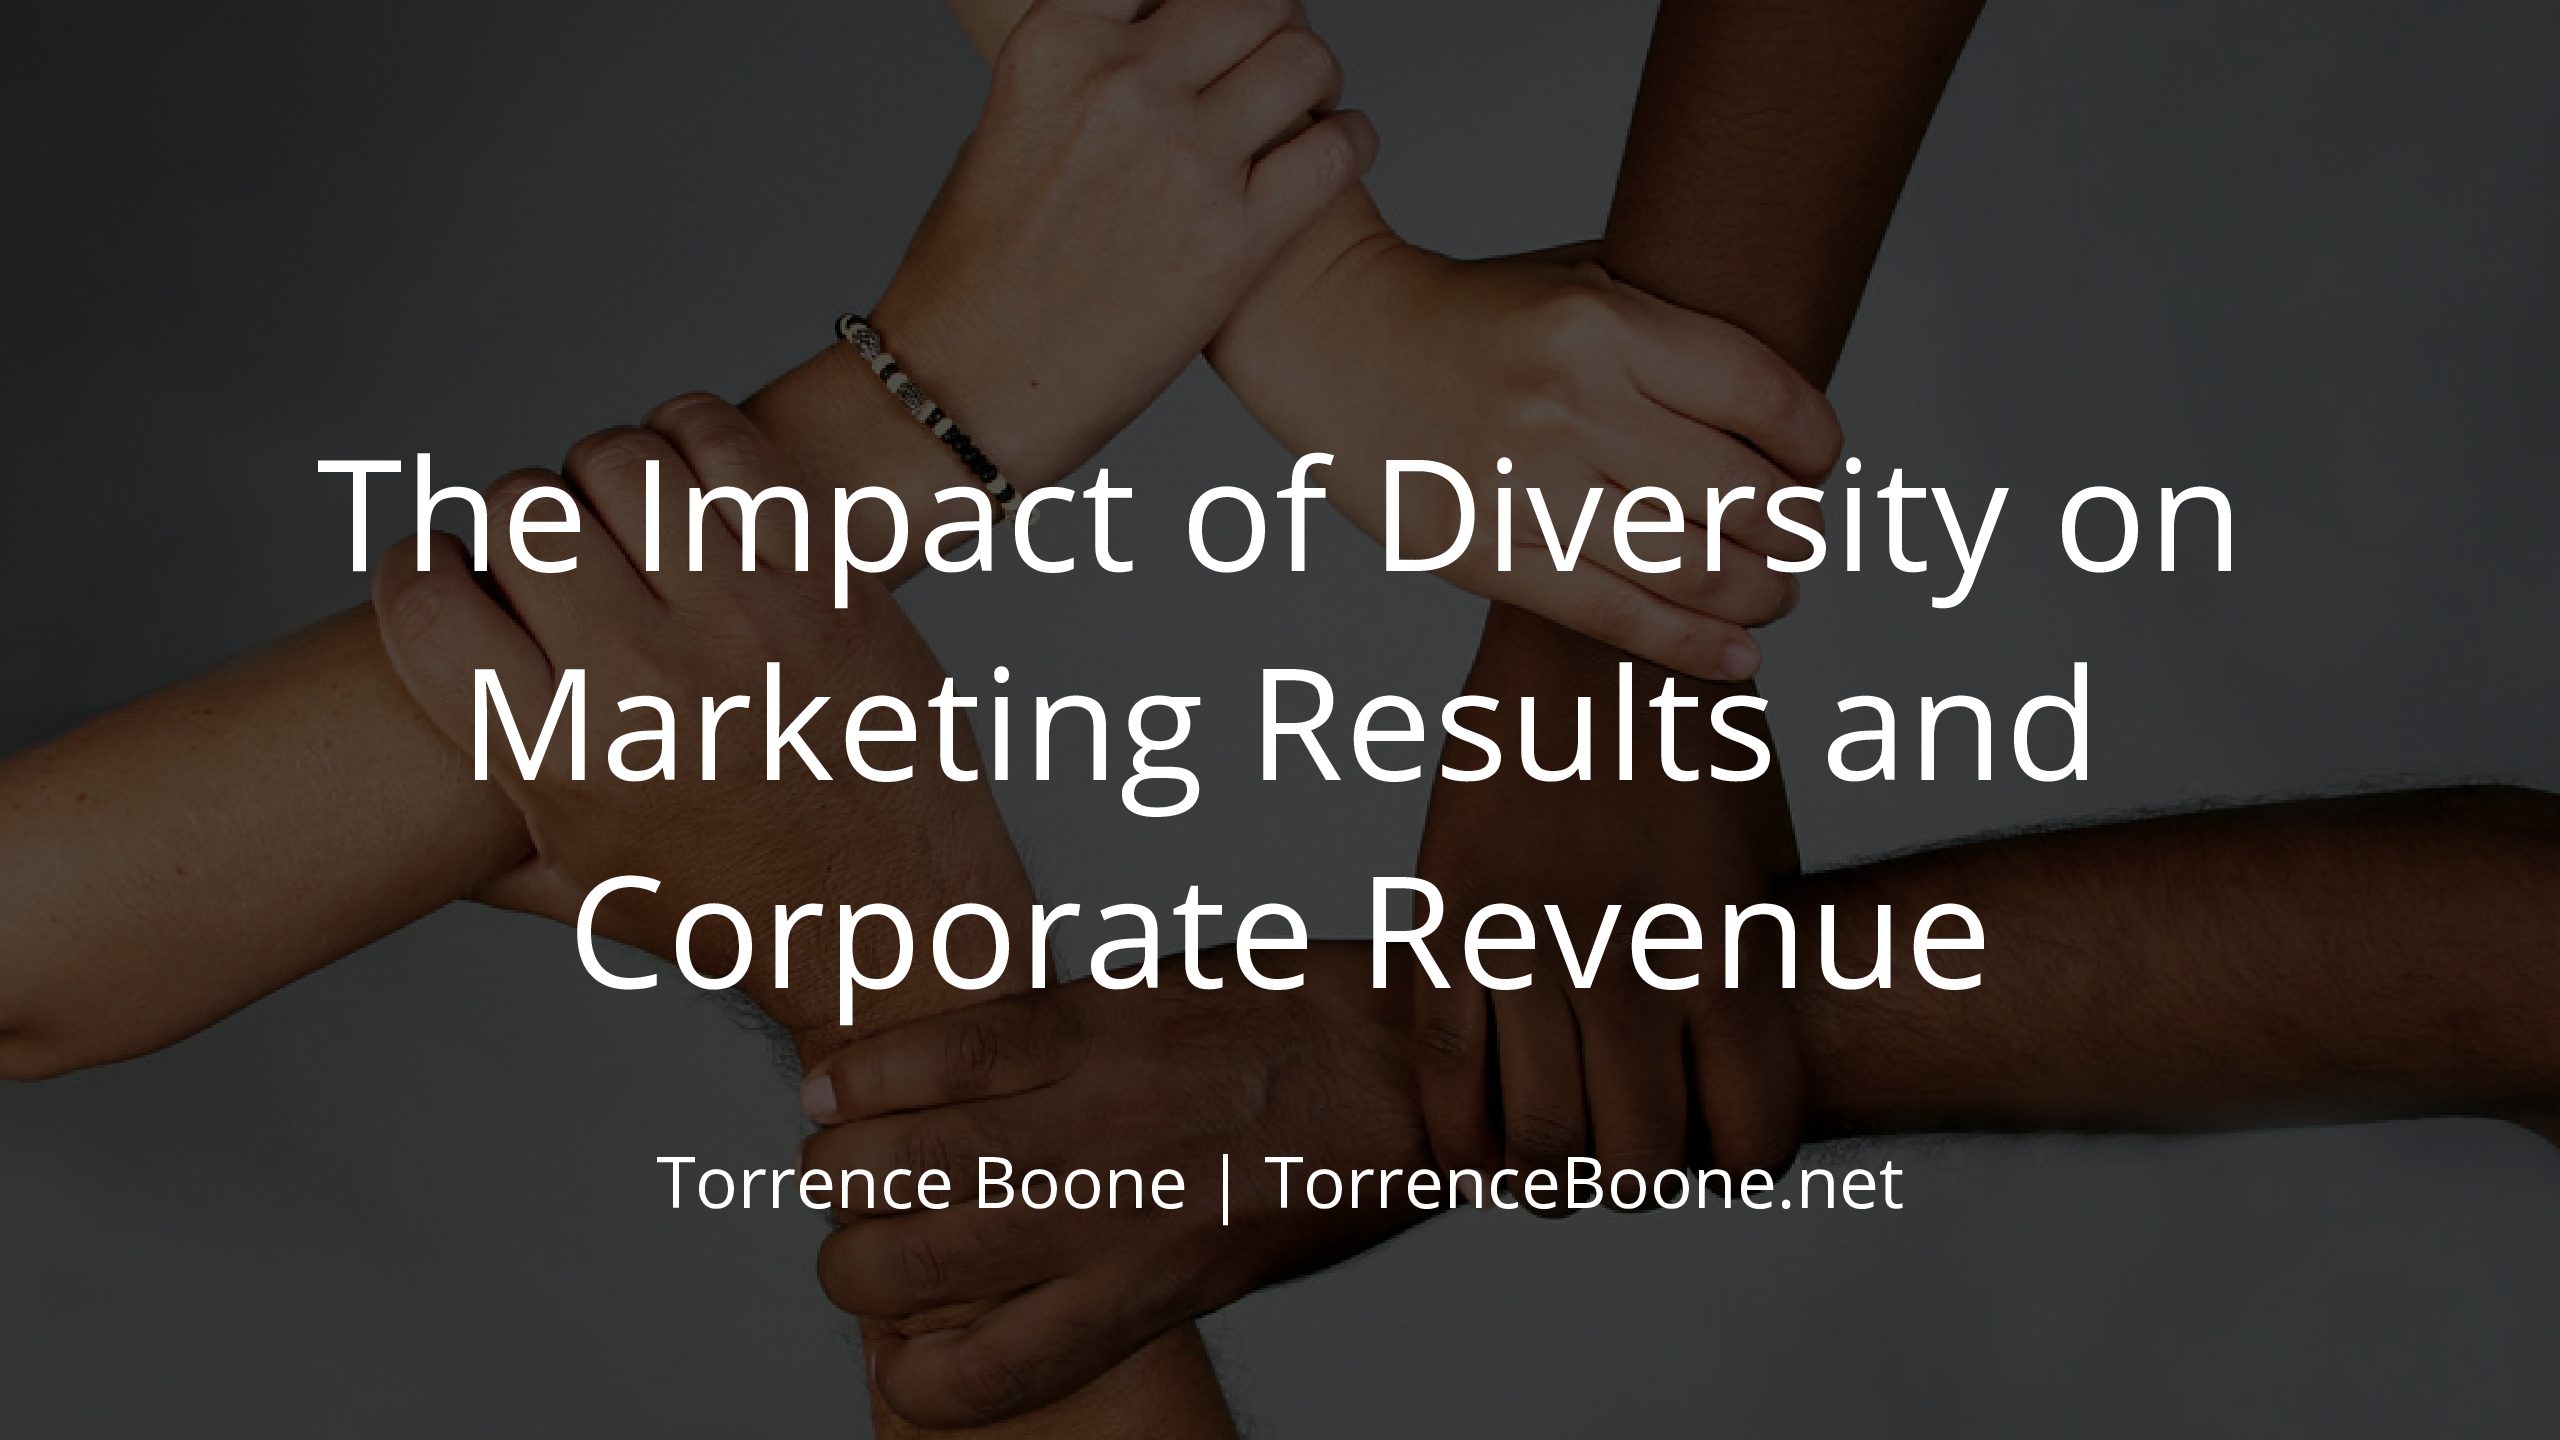 The Impact of Diversity on Marketing Results and Corporate Revenue